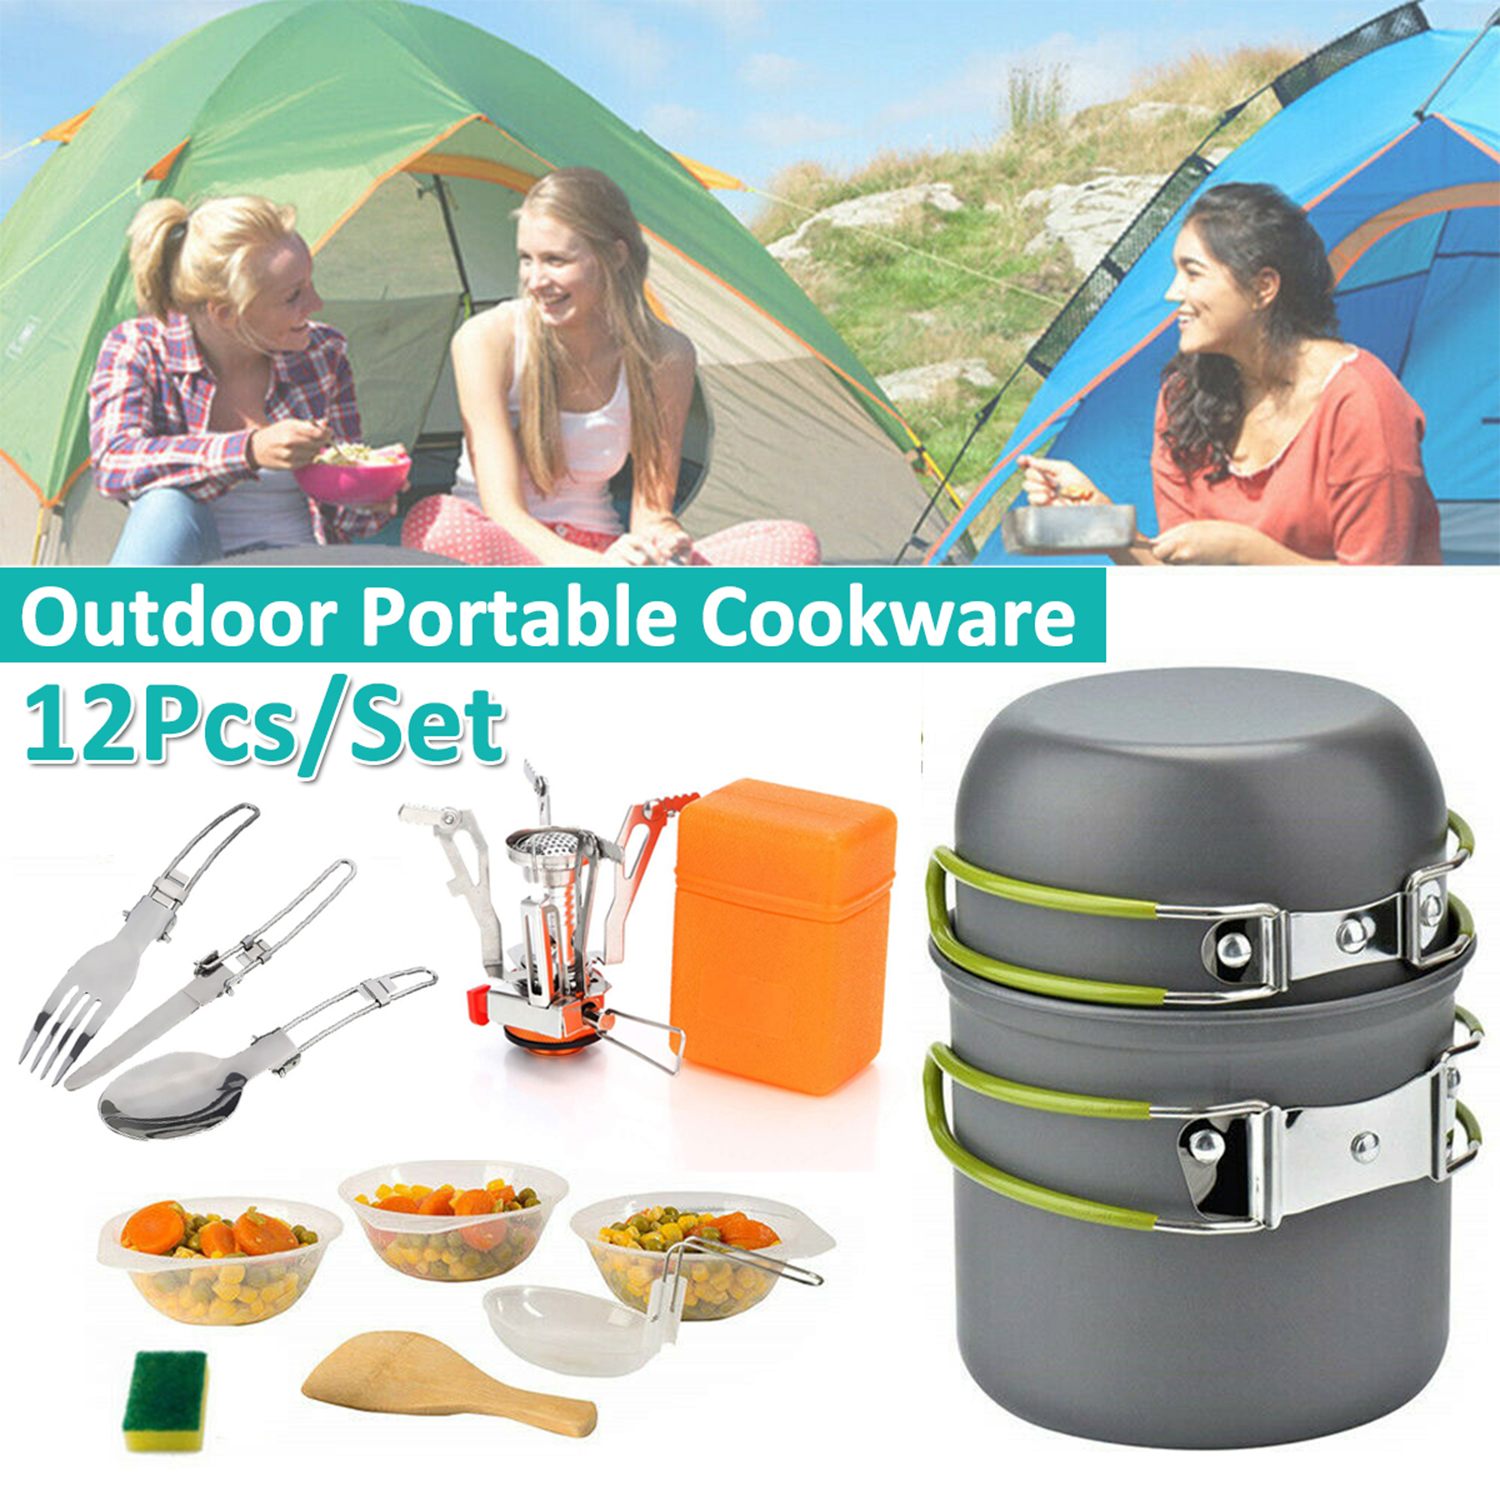 GL Portable Light Outdoor Camping Cookware Sets Gas Stove with Foldable Tableware Pan Dishwashing Sponge Hiking Picnic Tool 21